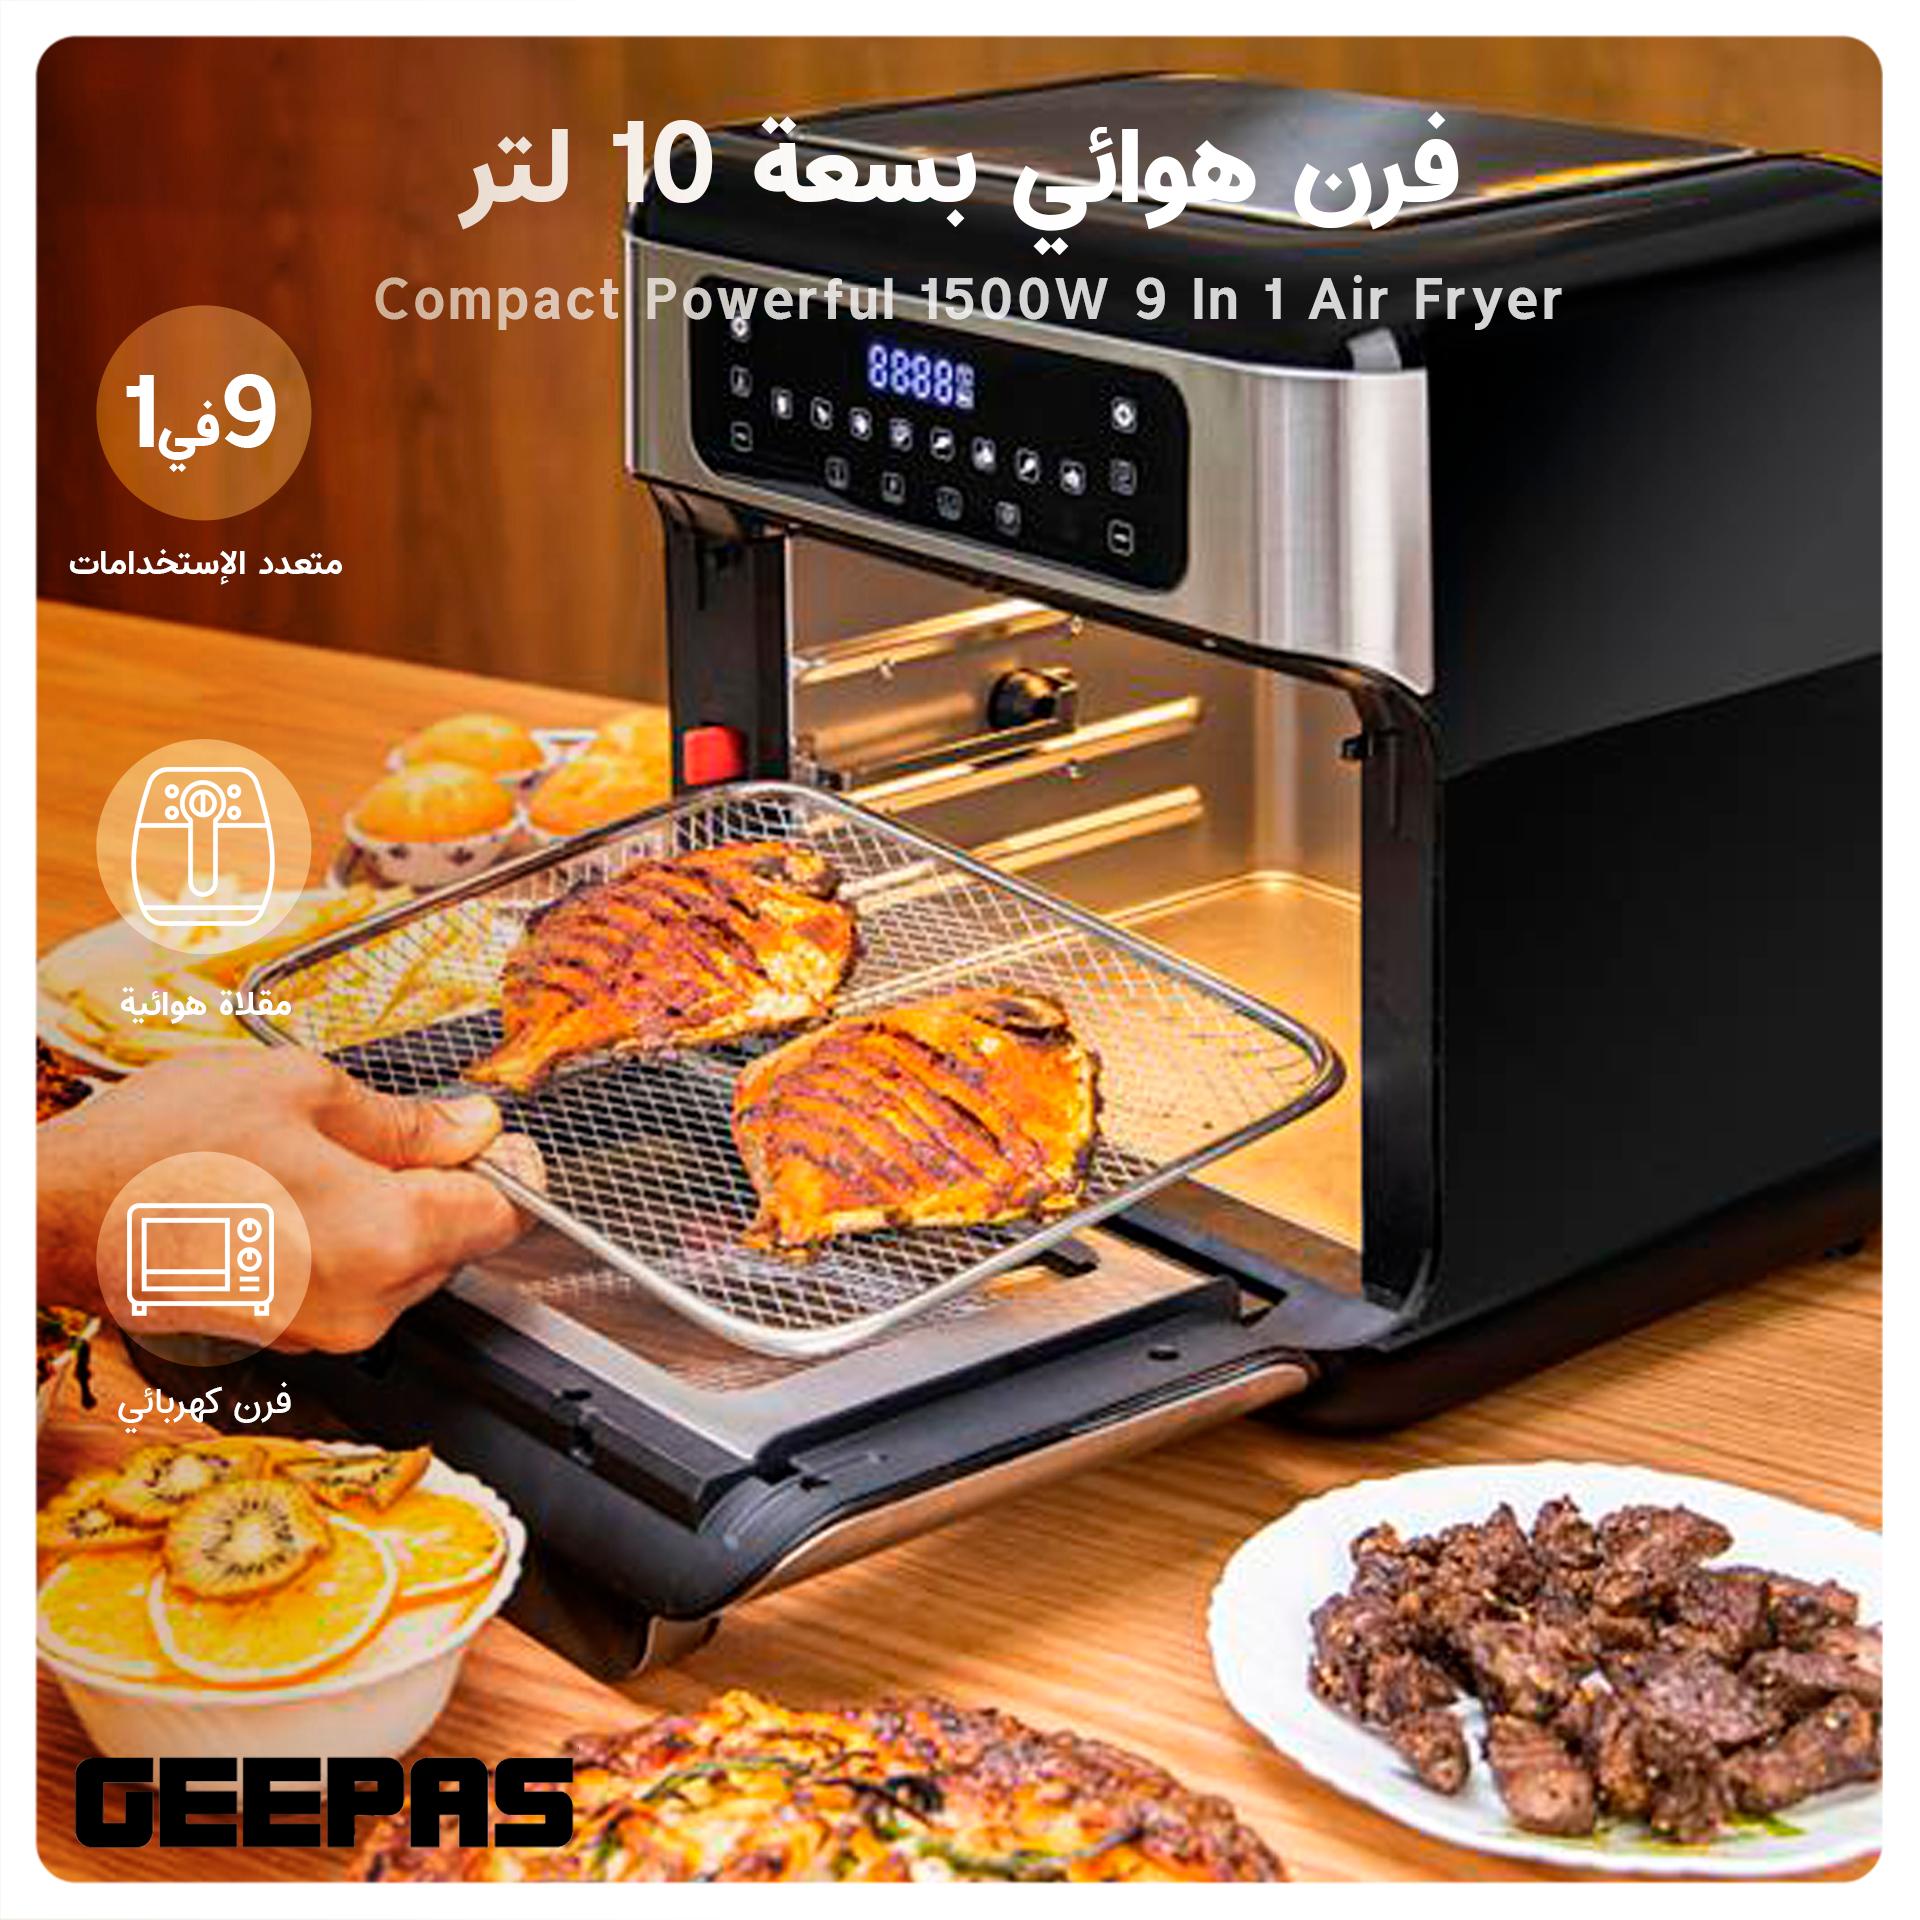 Geepas Compact Powerful 1500W 9 In 1 Air Fryer Oven with 10L Capacity & 9 Preset Functions GAF37518